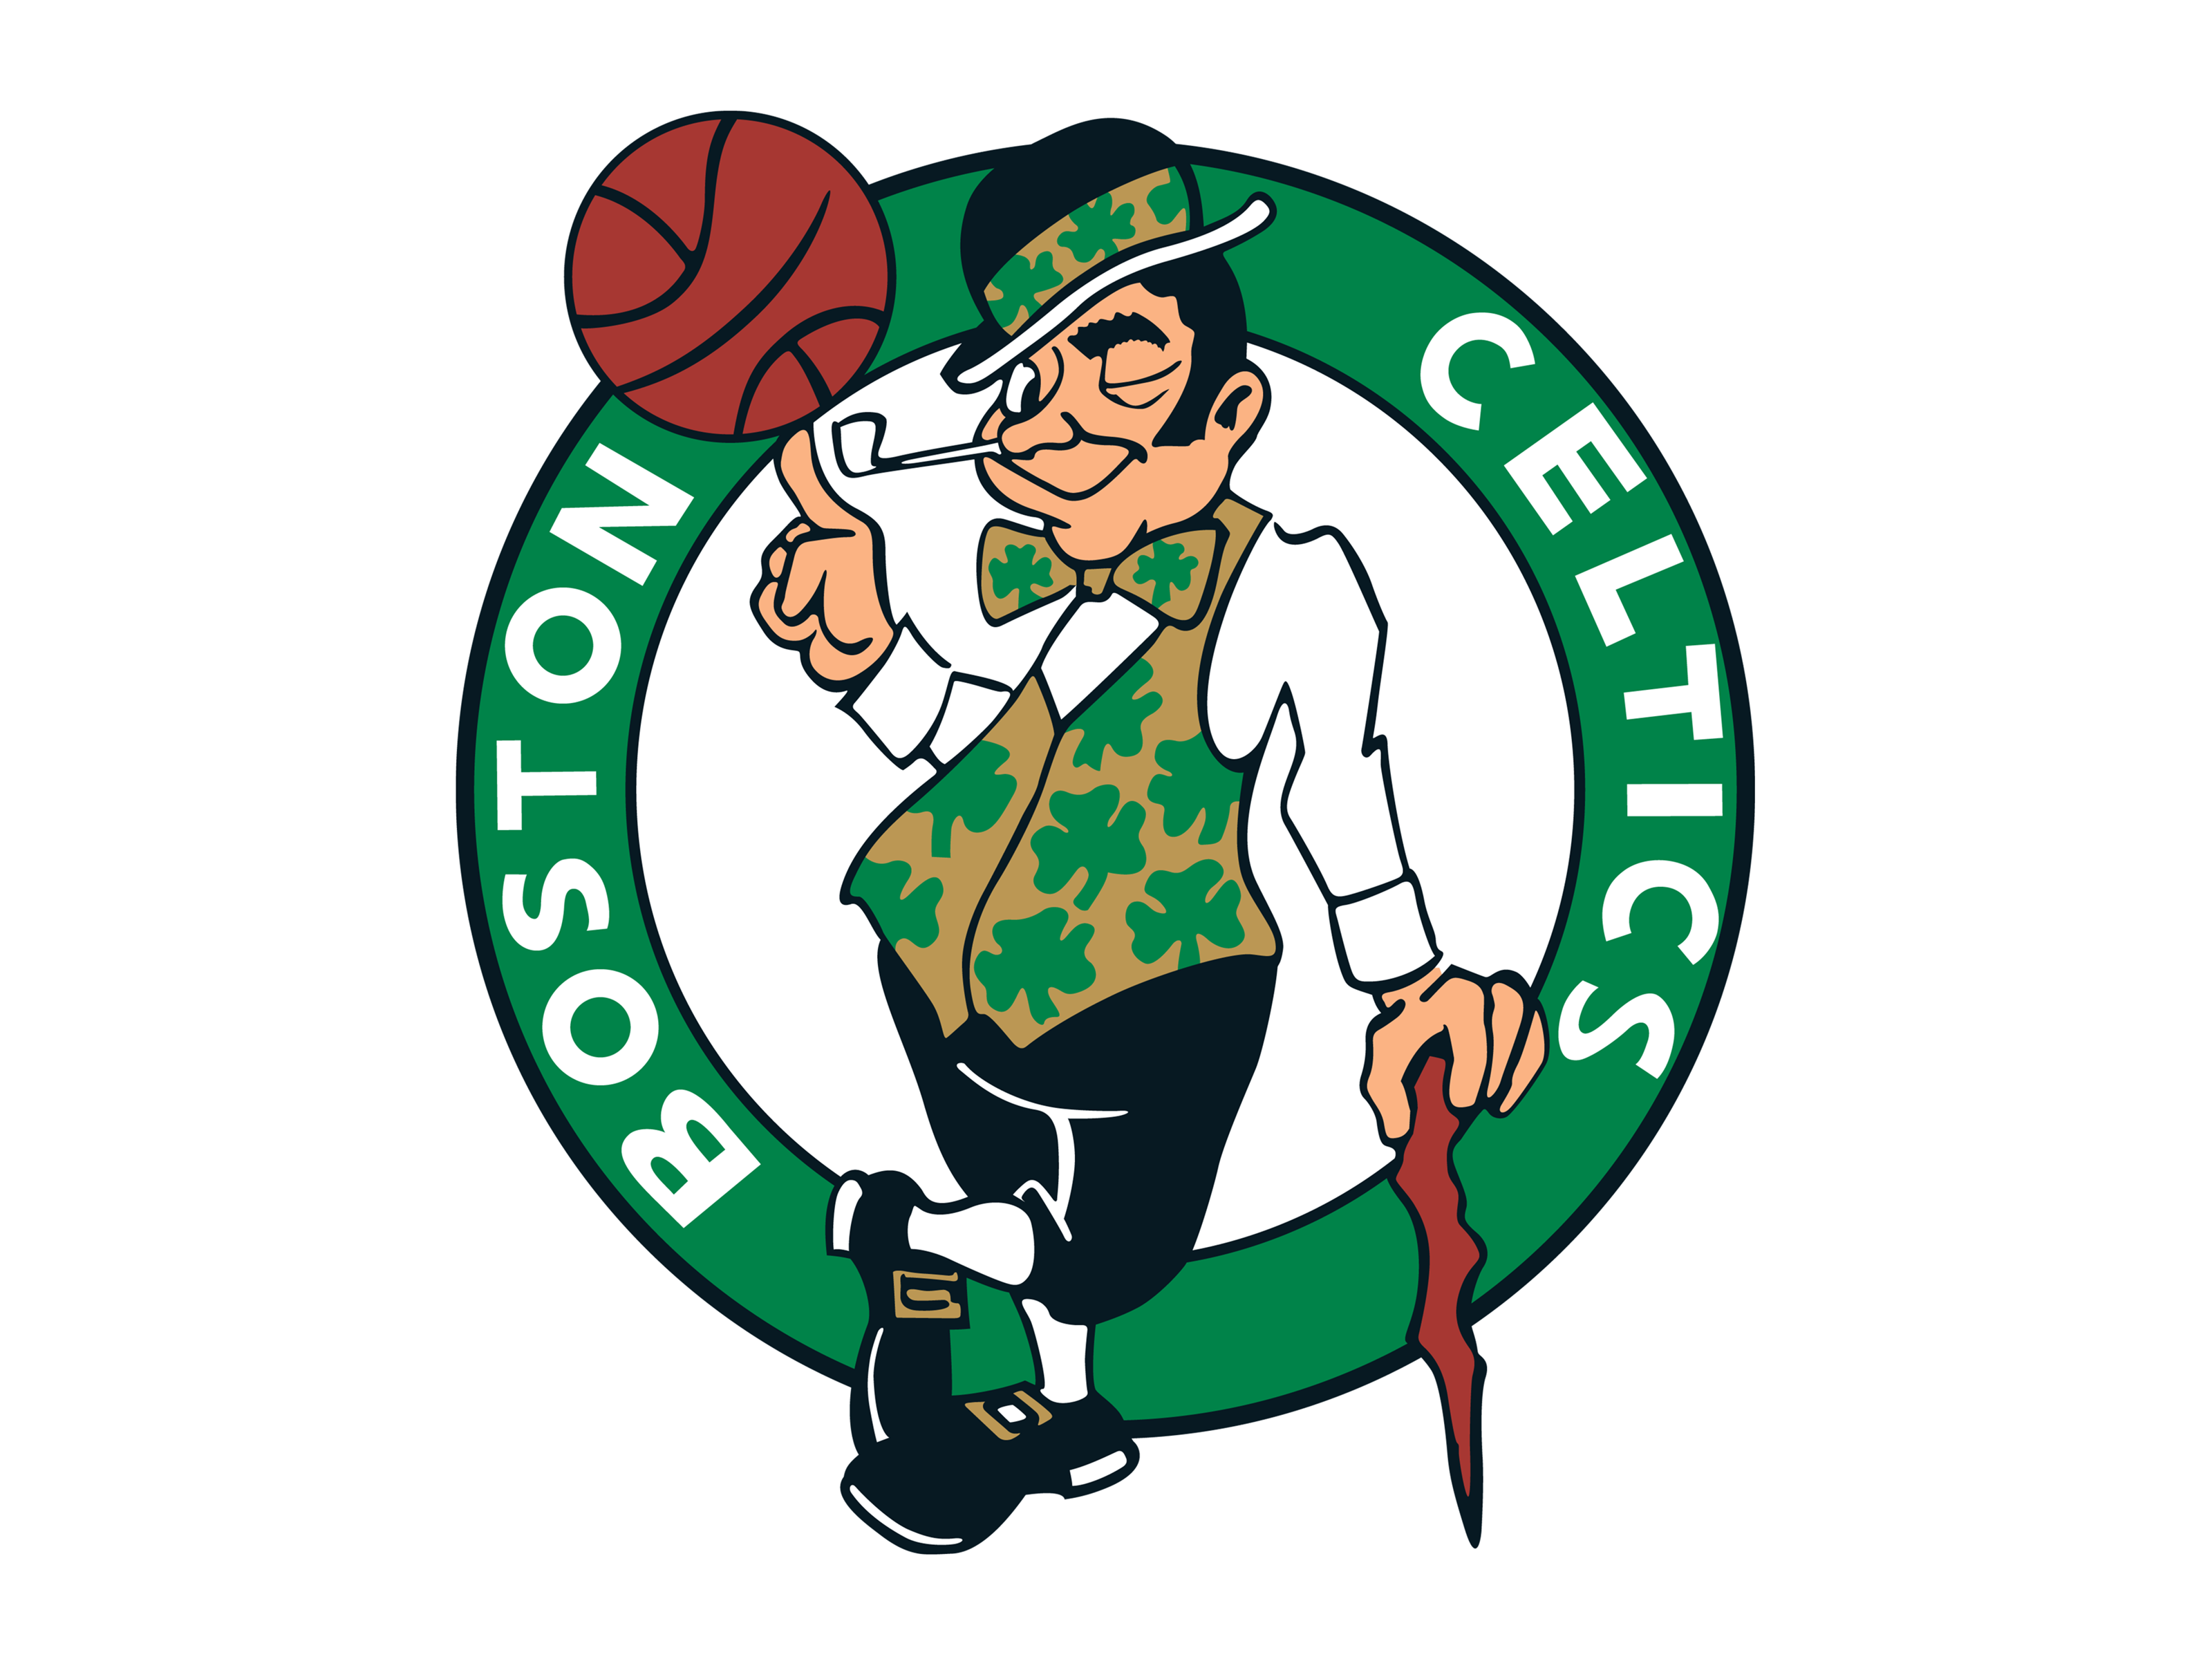 How to Watch Upcoming Boston Celtics Teams and Games Without Cable in 2022